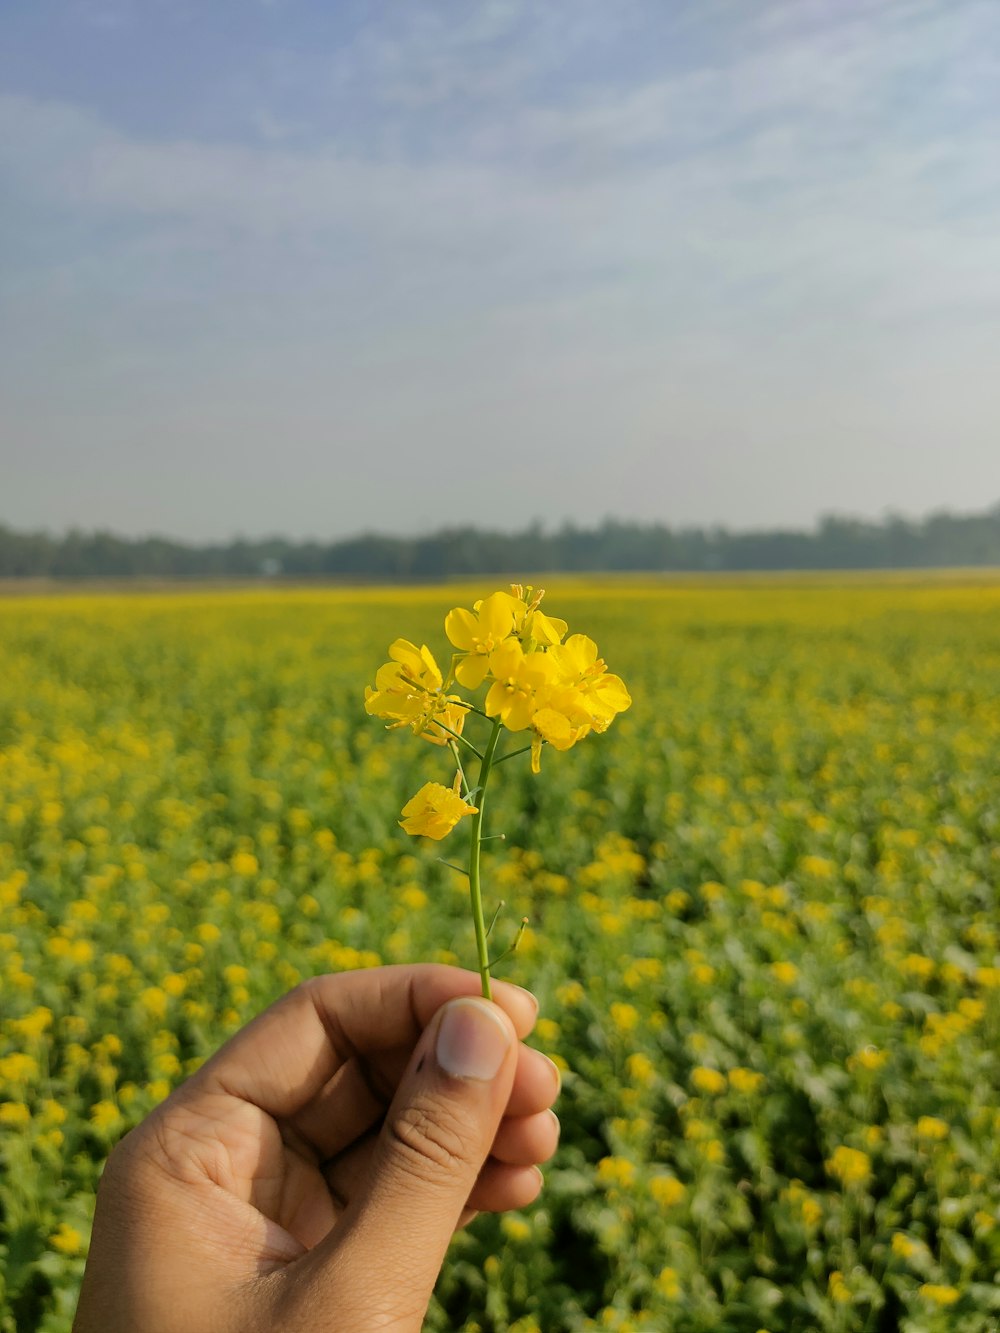 a hand holding a small yellow flower in a field